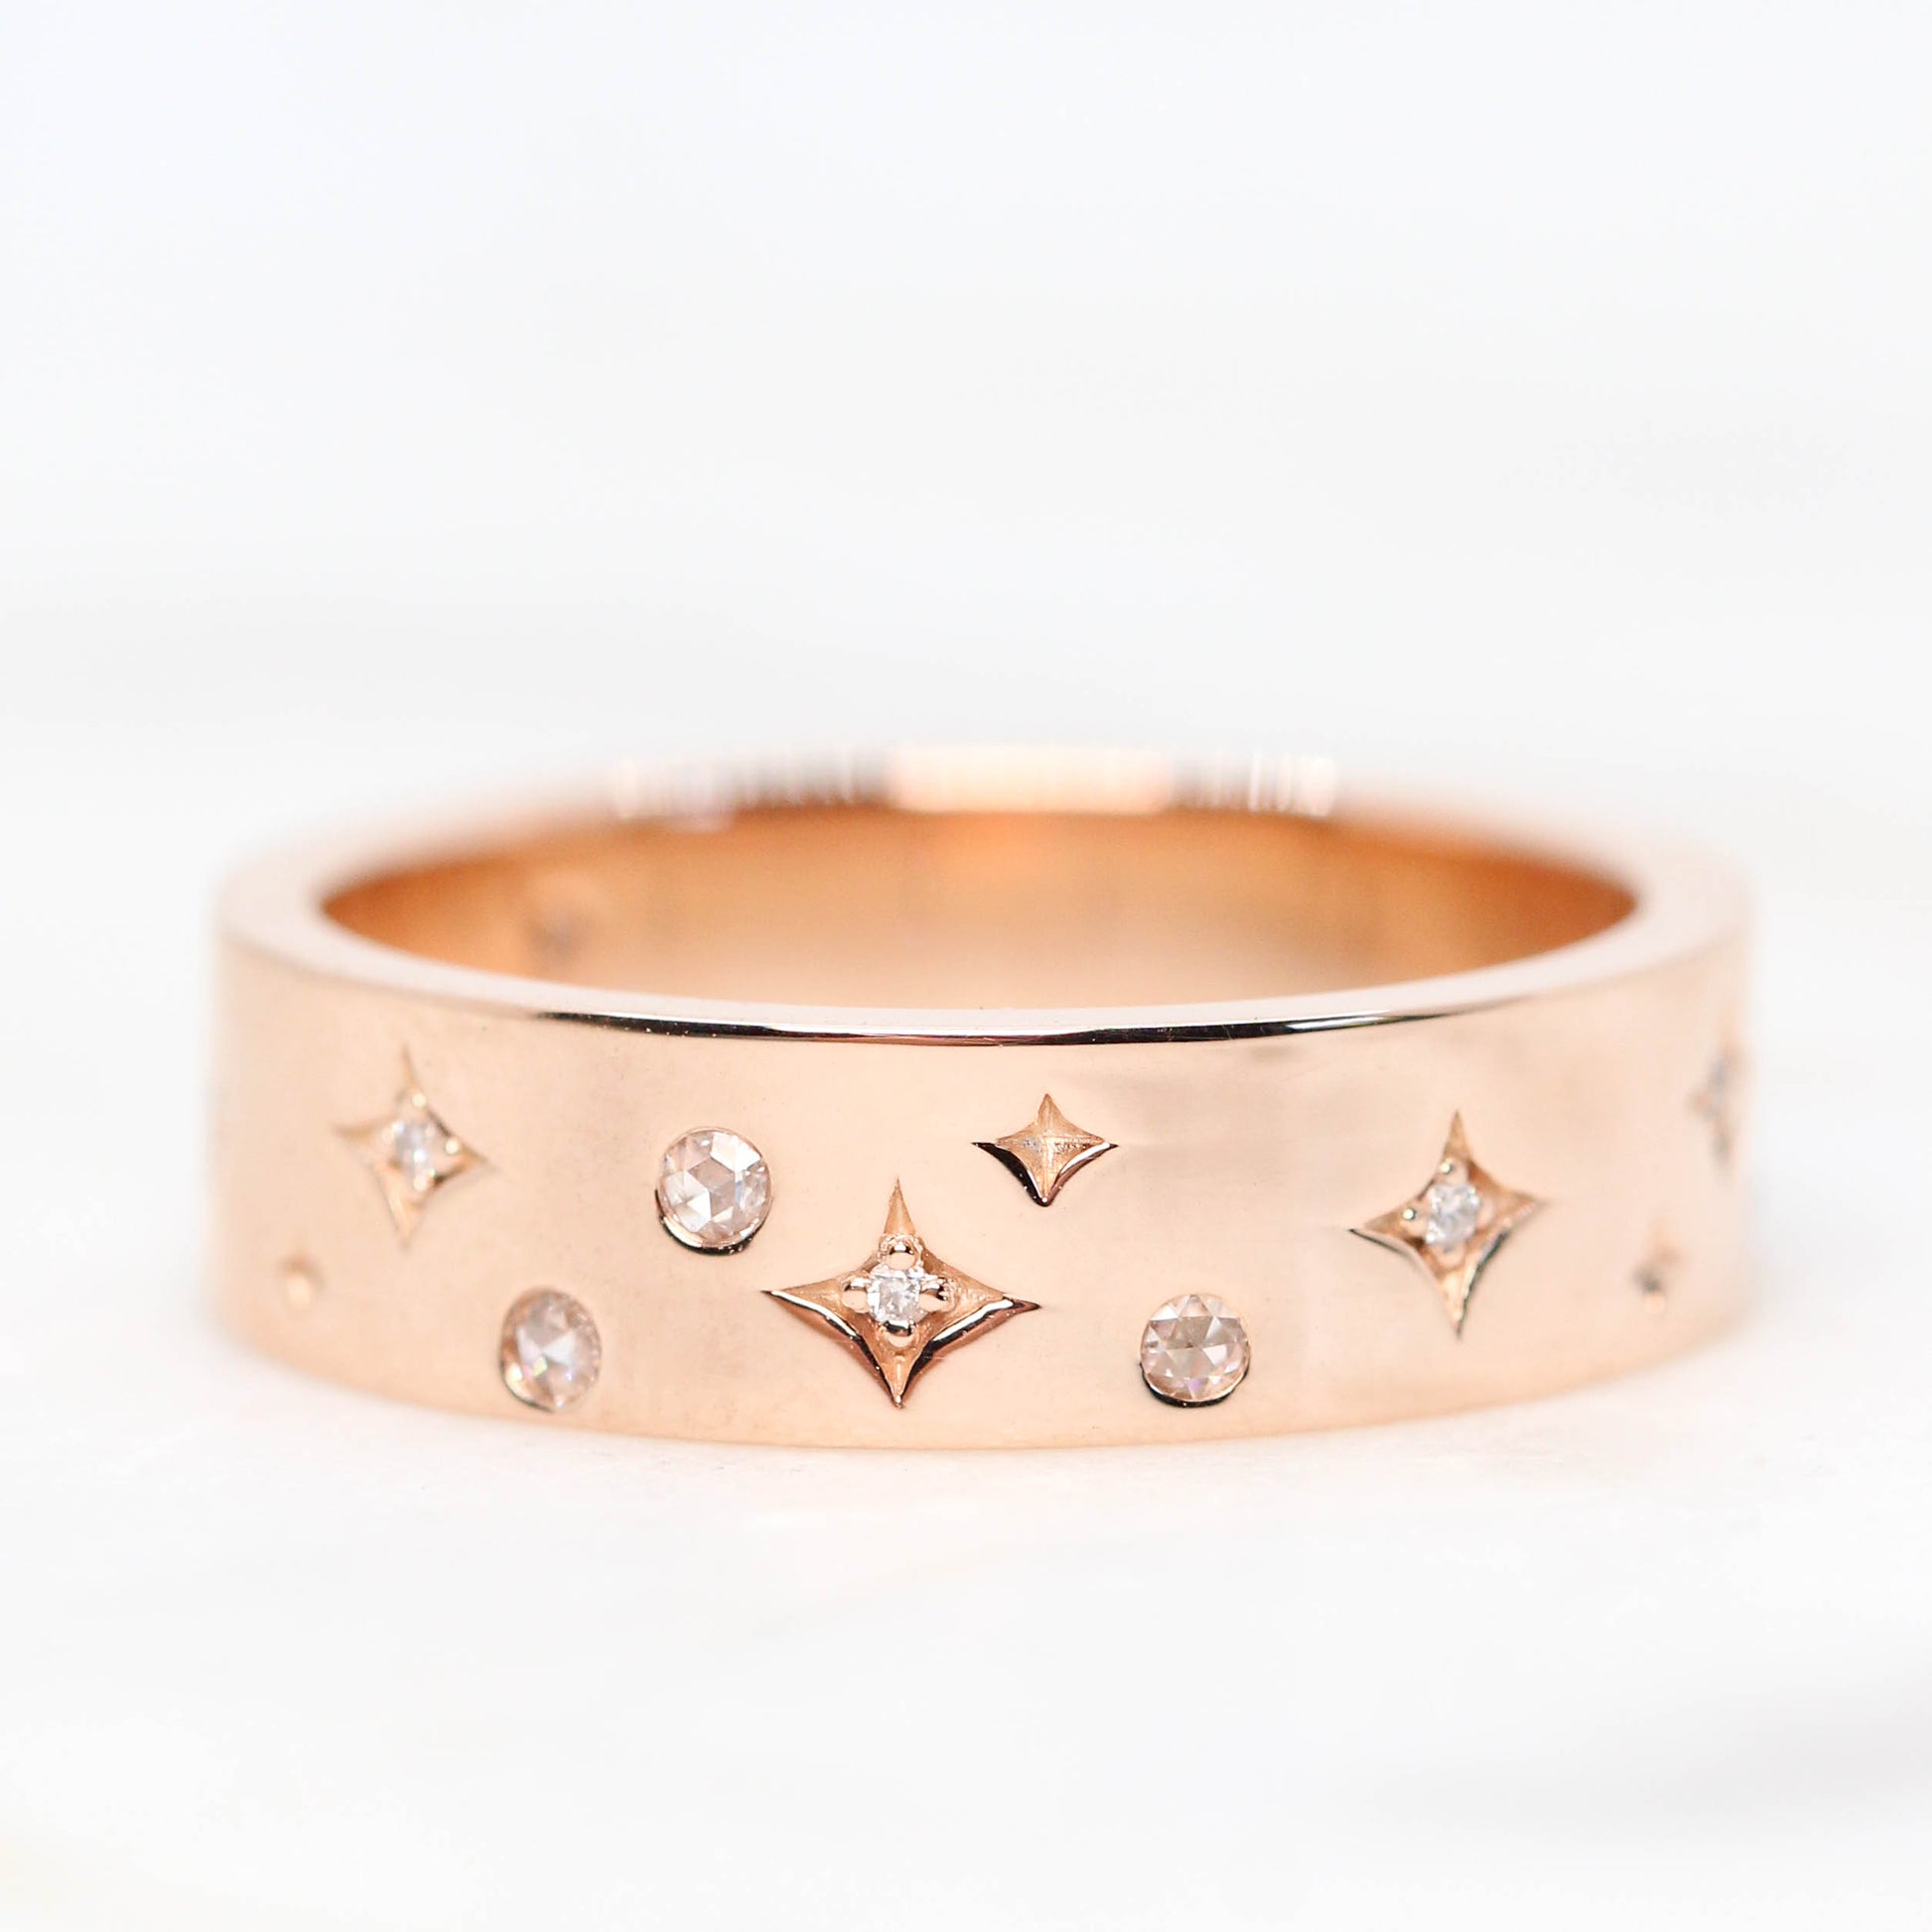 Samantha- (J) *used price written in notes on bag* Constellation Band - Unisex Band with Metal and Diamond Accents - Made to Order, Choose Your Gold Tone - Midwinter Co. Alternative Bridal Rings and Modern Fine Jewelry